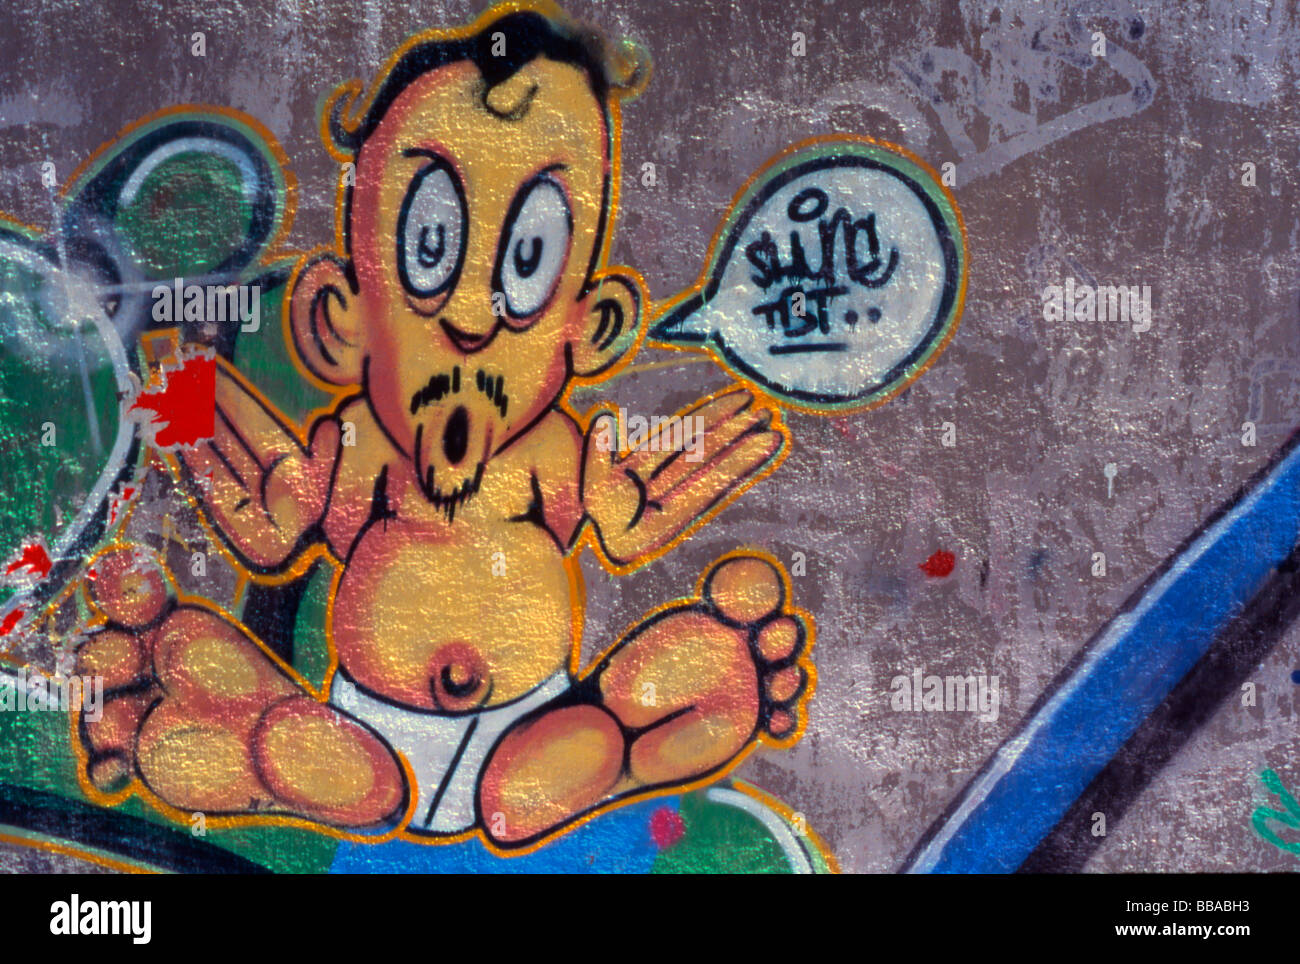 Madrid, Spain. Graffiti baby with moustache and beard Stock Photo